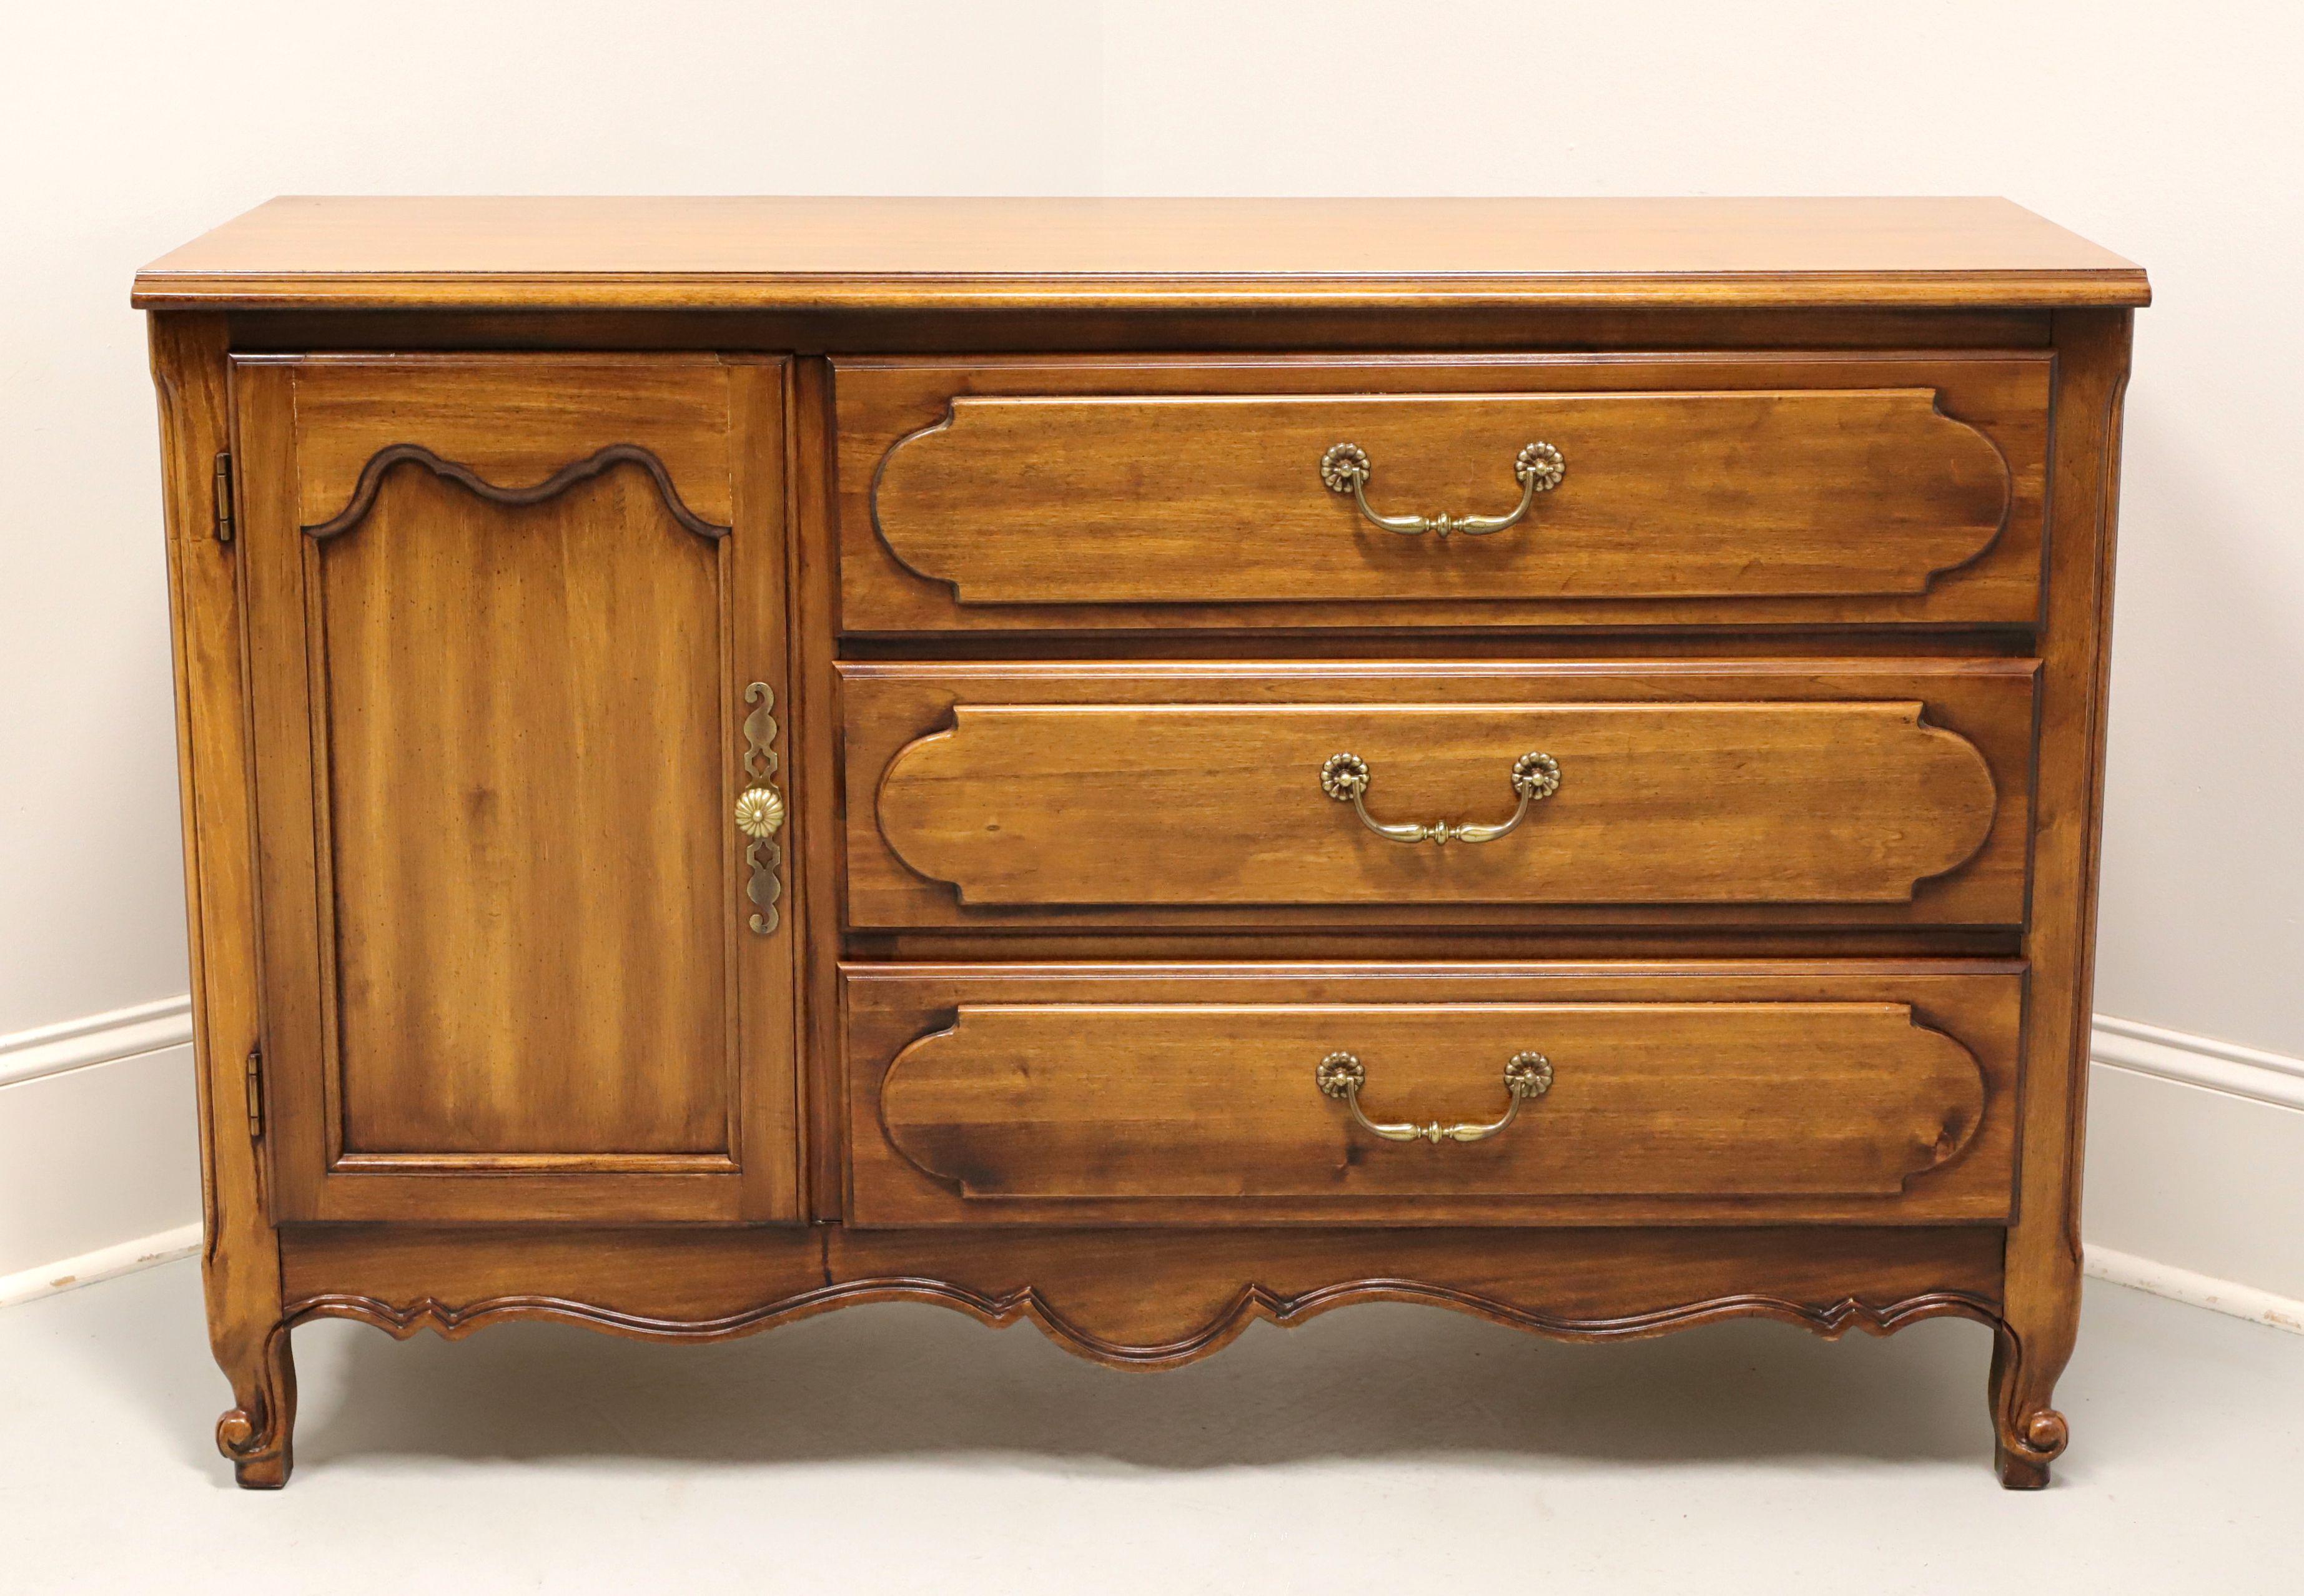 A French Country Louis XV style double dresser by Henry Link, part of Lexington Furniture, from their Margaux Collection. Cherry wood with brass hardware, bevel edge to top, recessed door front, raised drawer fronts, carved apron, and scroll front